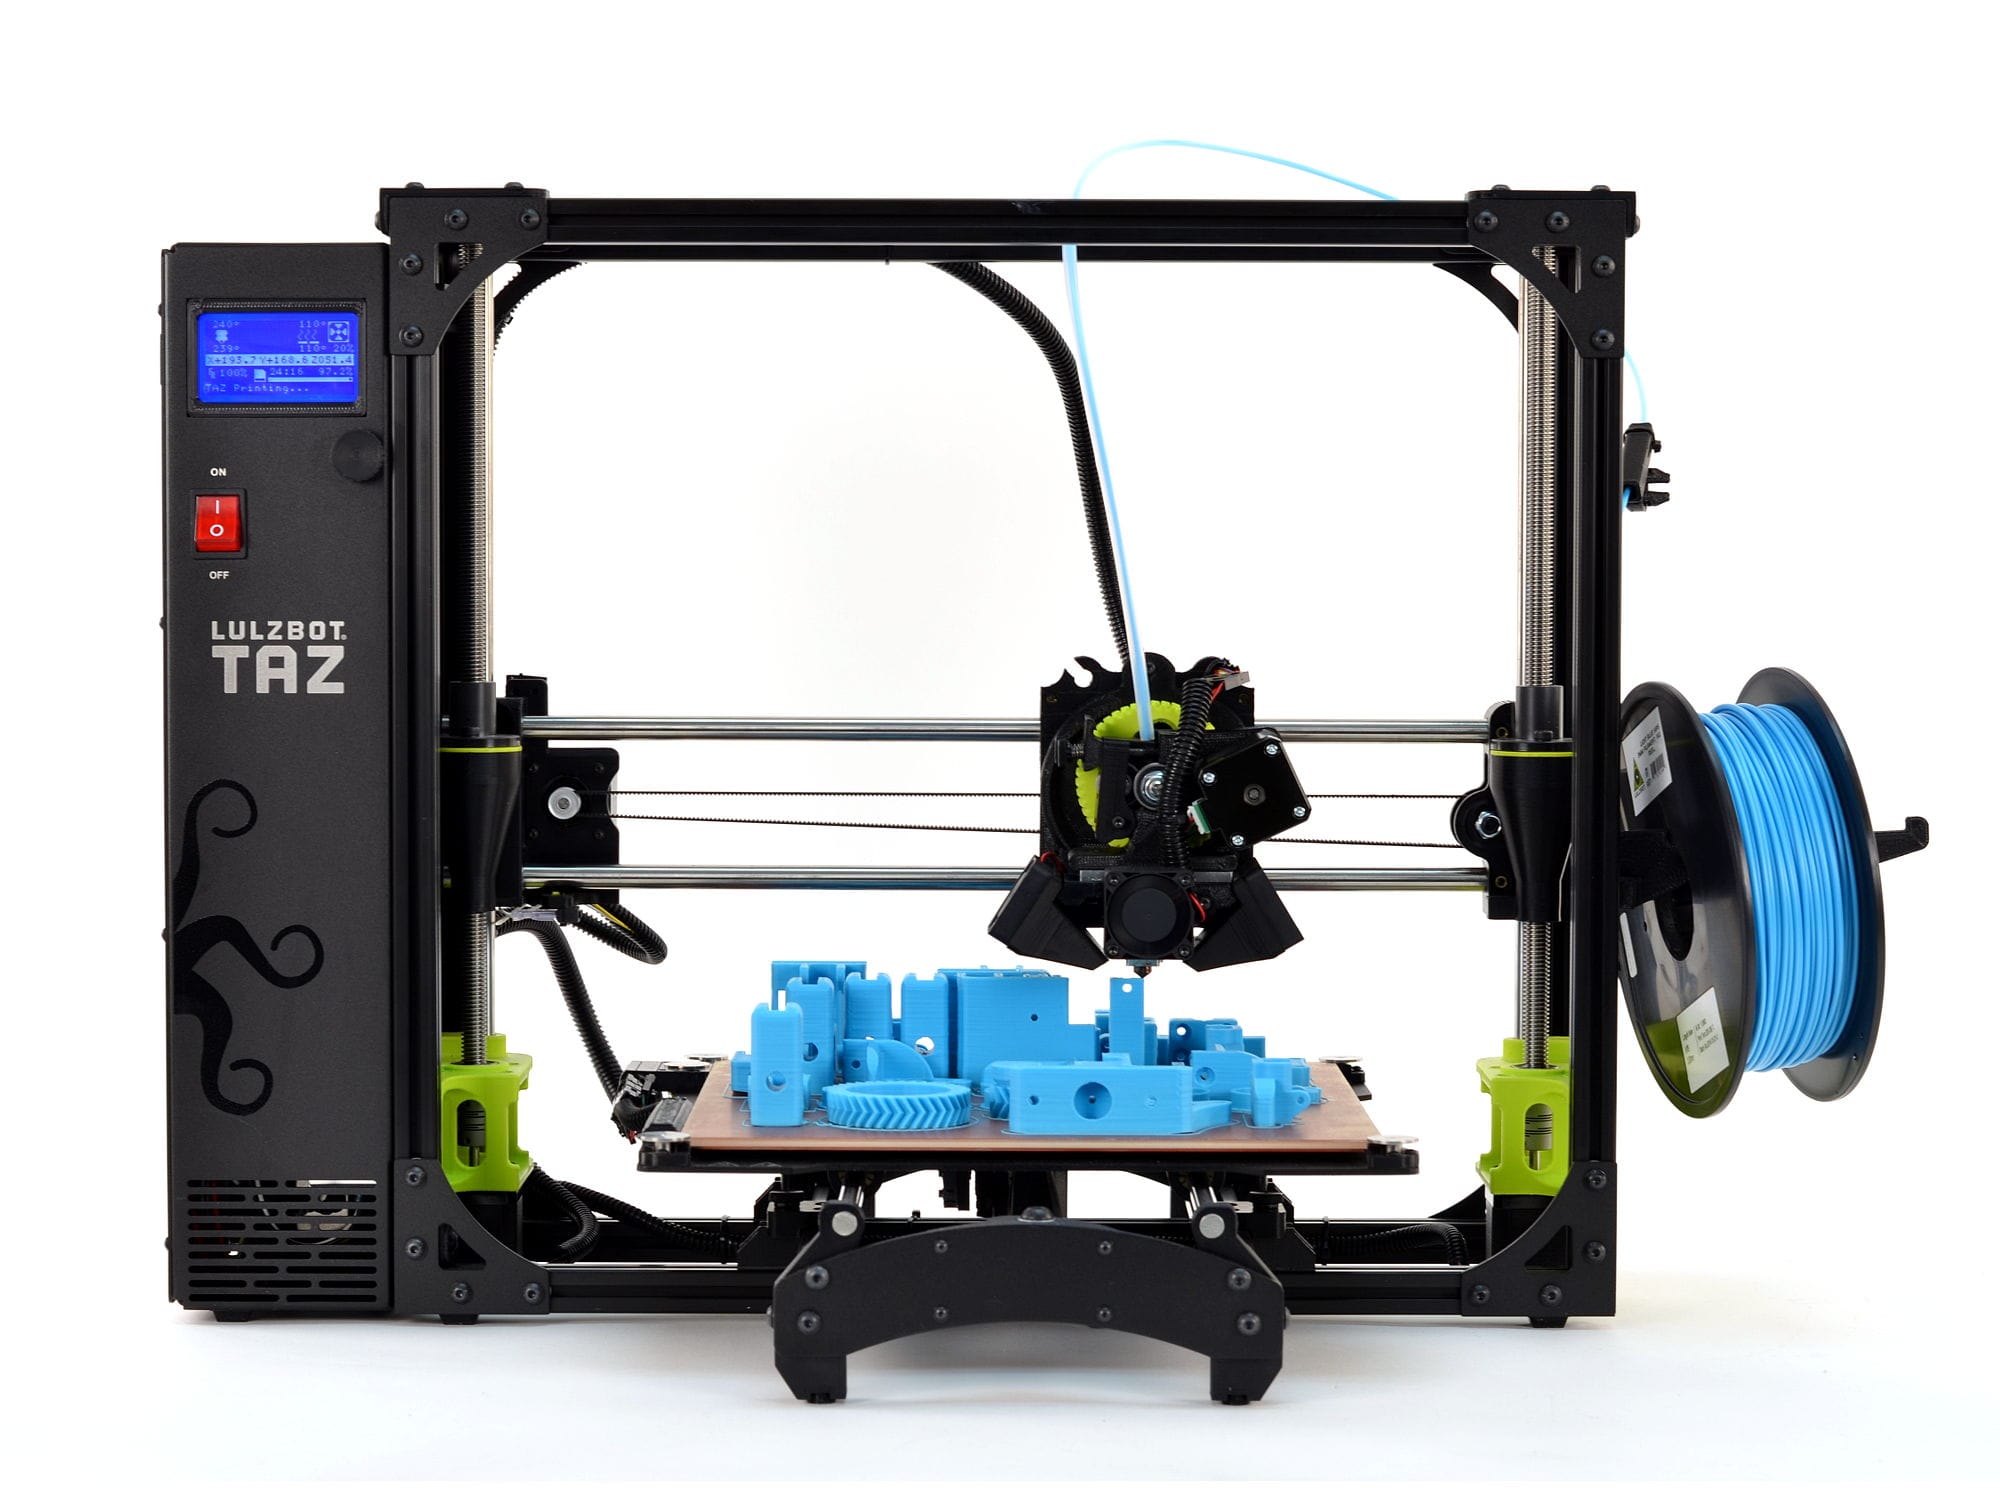  Front view of the current LulzBot TAZ 6 